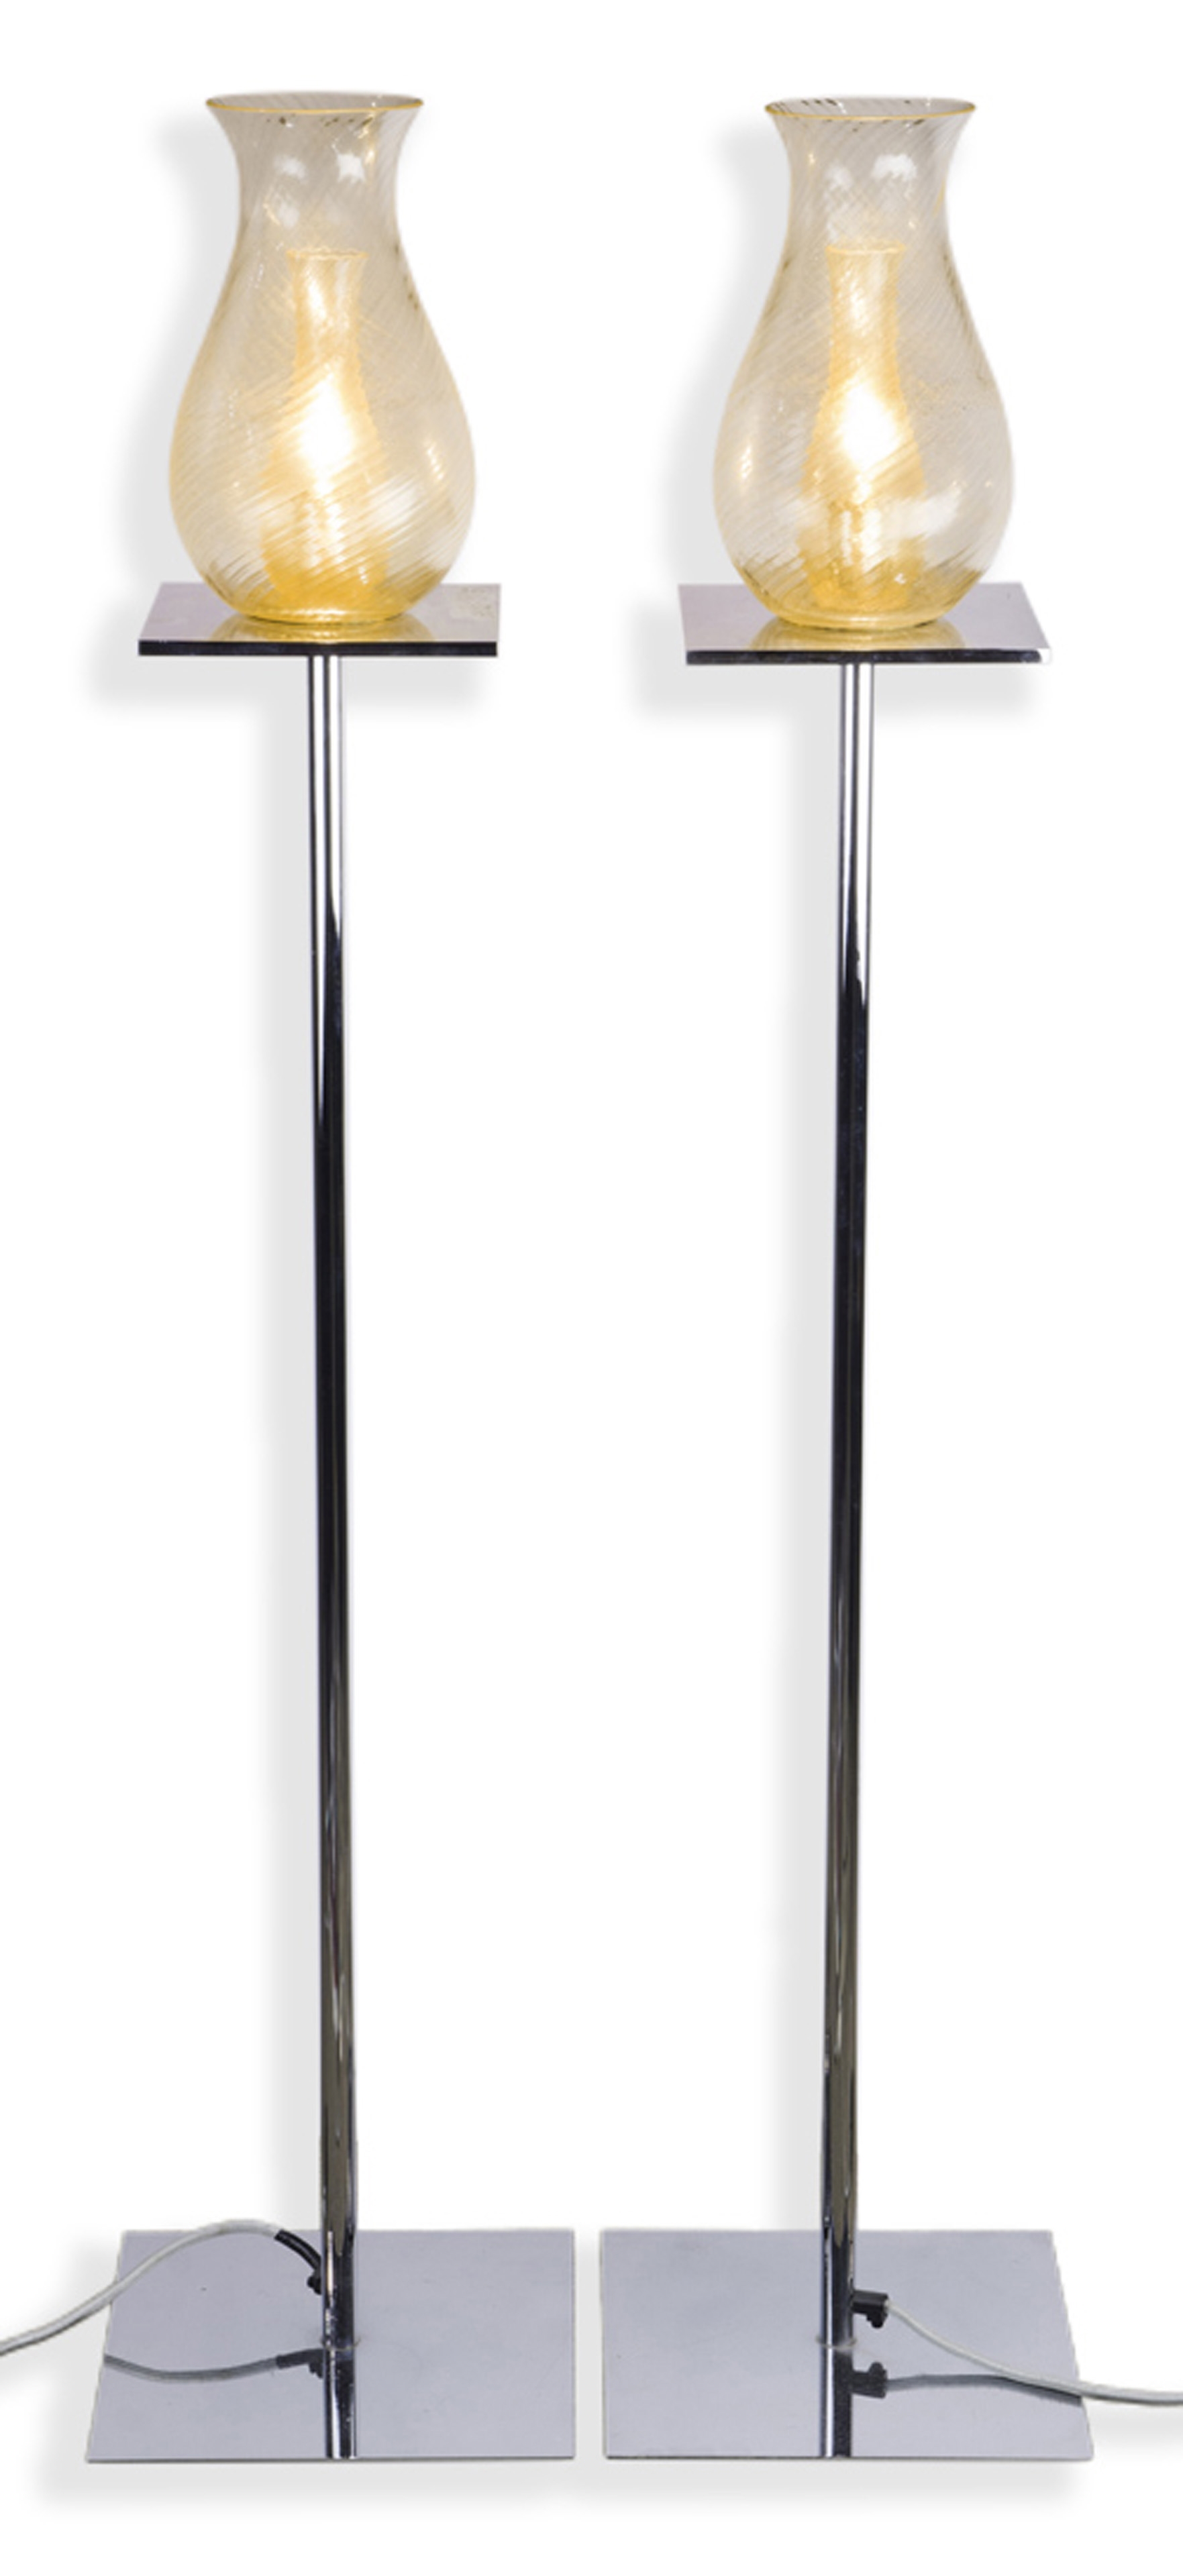 A pair of Philippe Starck custom floor lamps, for the Clift Hotel by Philippe Starck, circa 2000